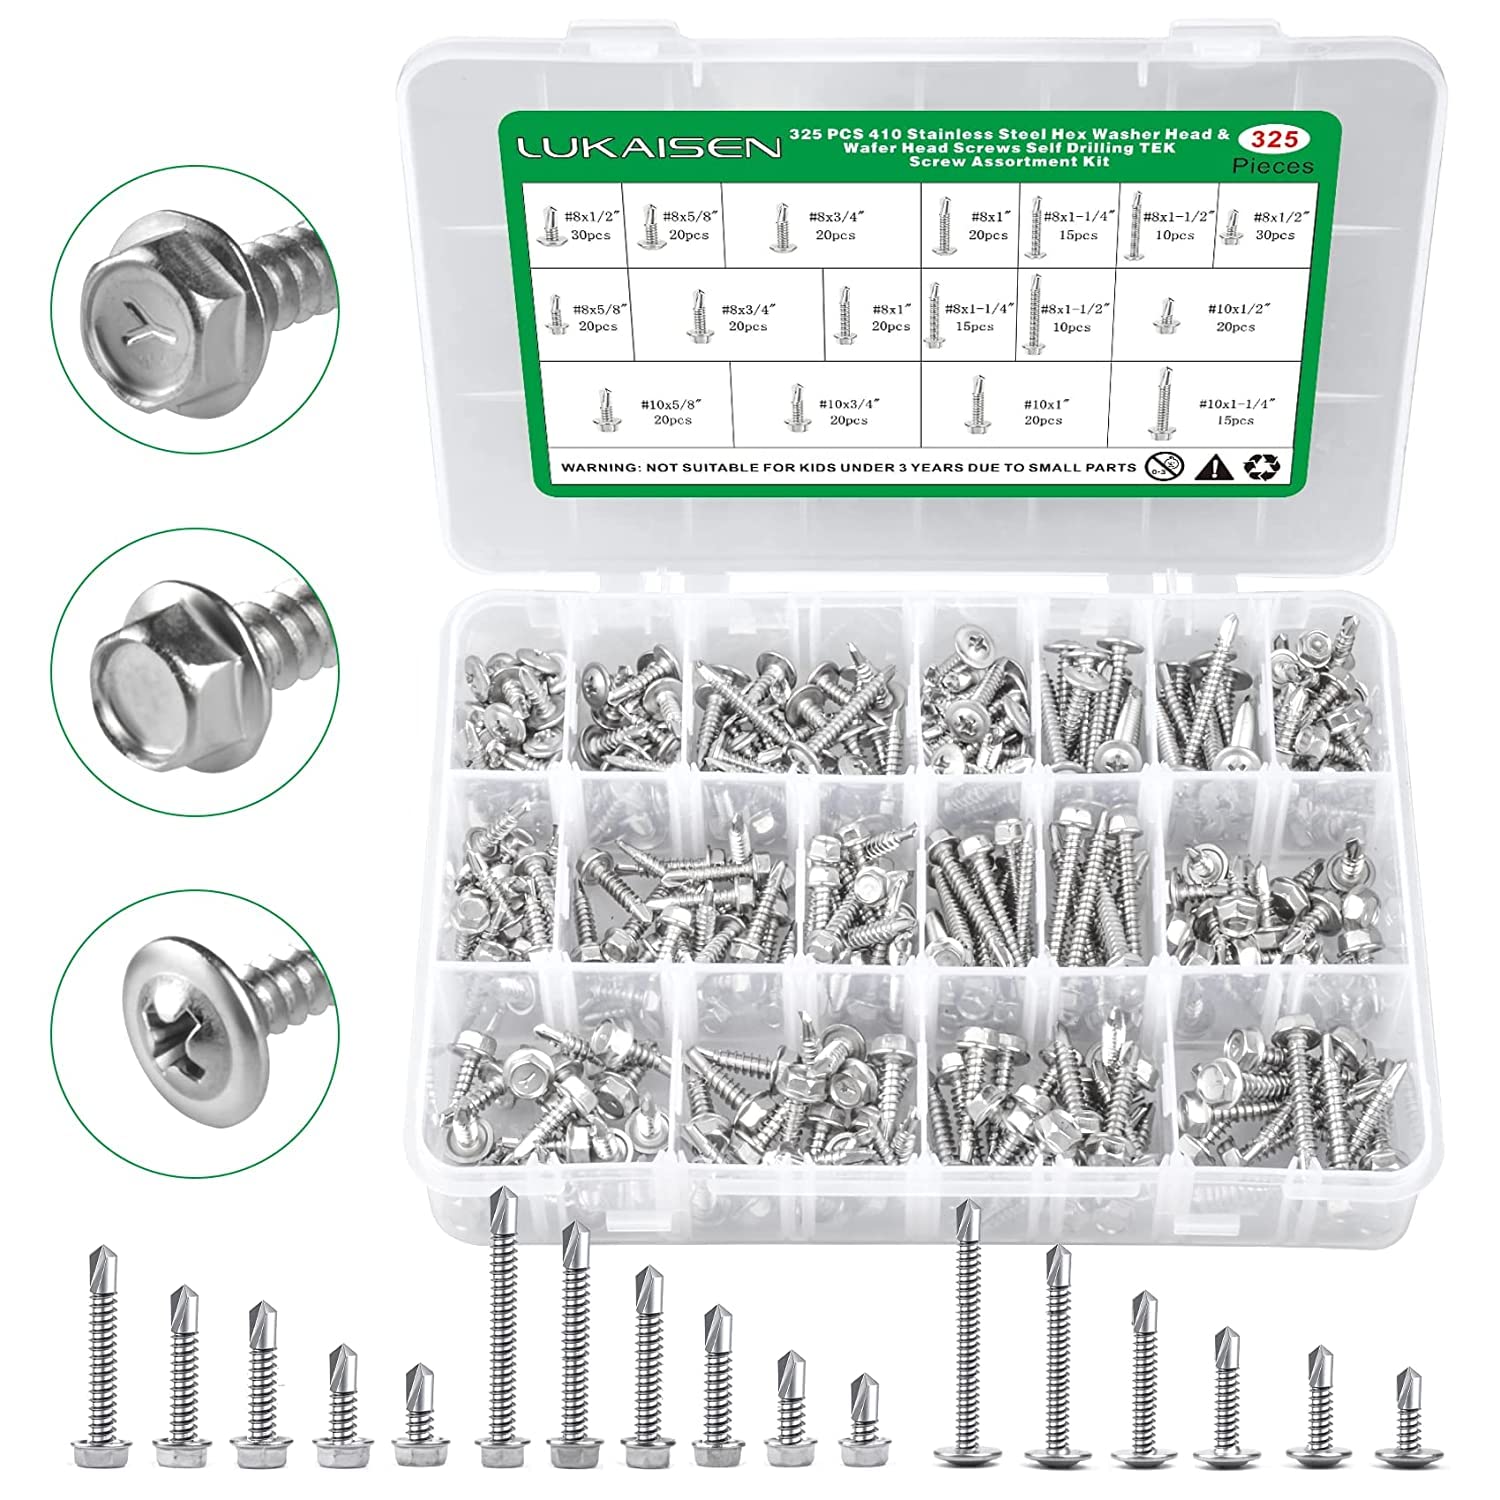 LuKaiSen Self Tapping Screws, 325 Pcs -410 Stainless Steel #8#10 Hex Washer Head & Wafer Head 17 Sizes Self Drilling Screw Assort